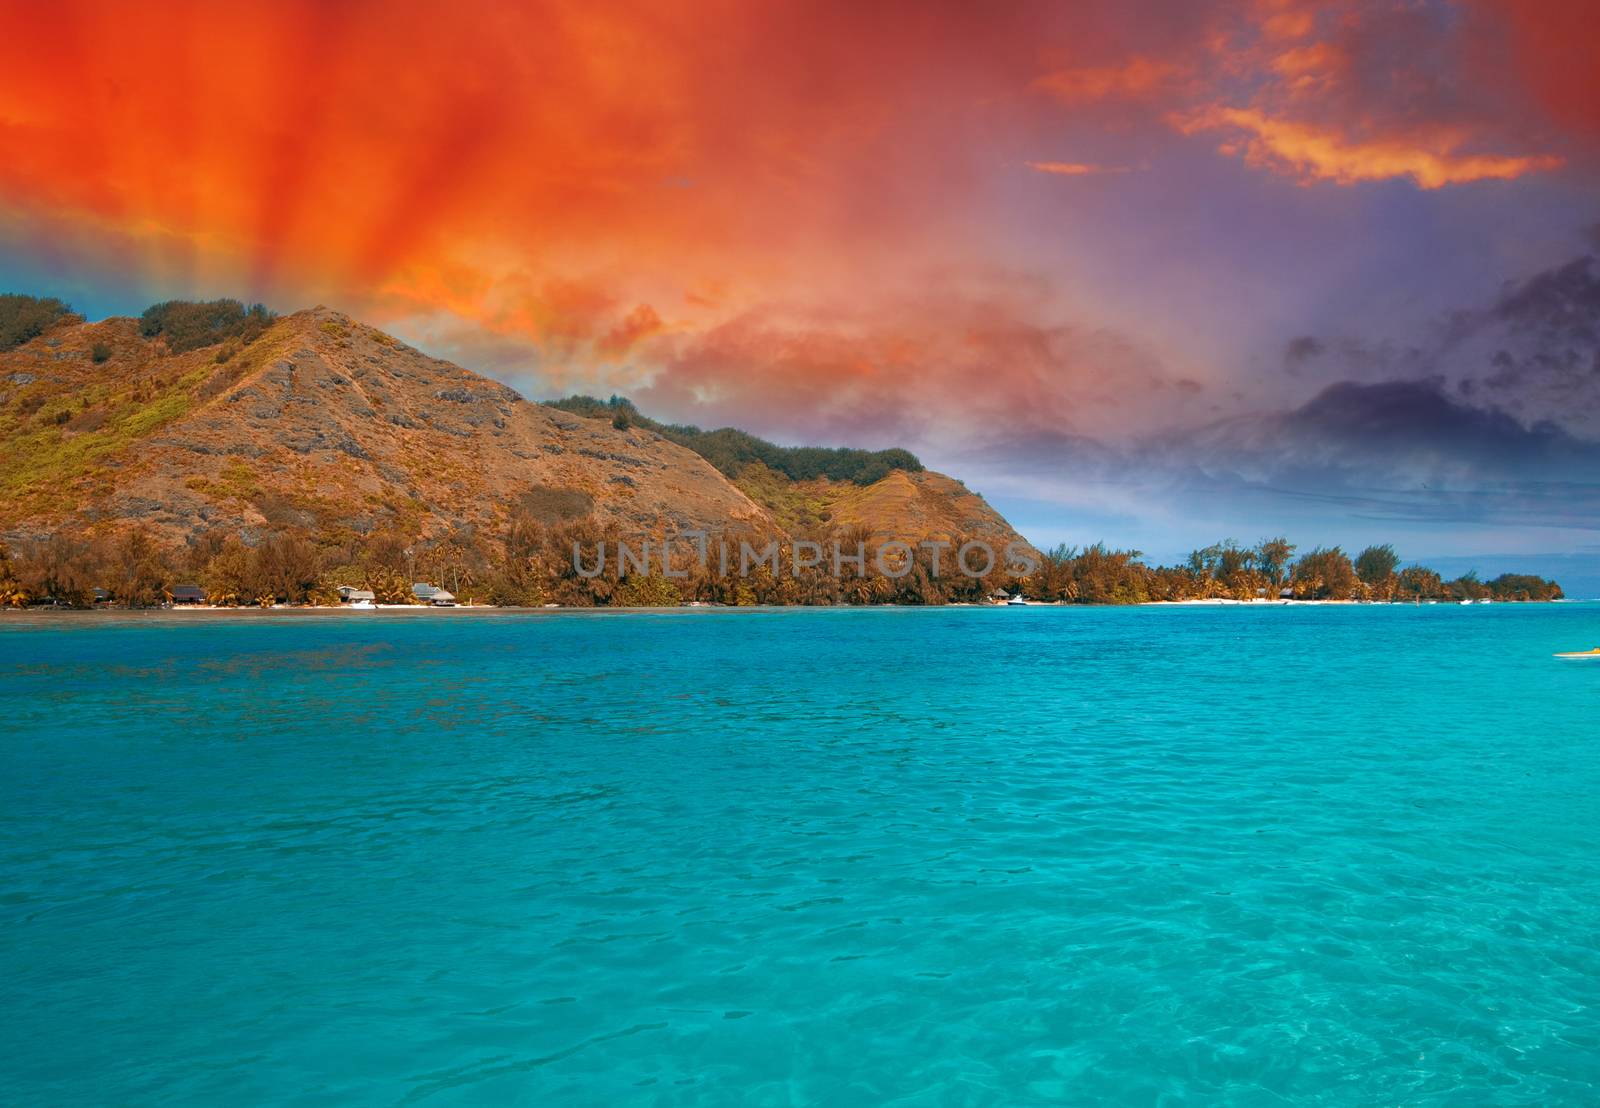 Polynesia Islands, wonderful seascape with sunset and mountains.